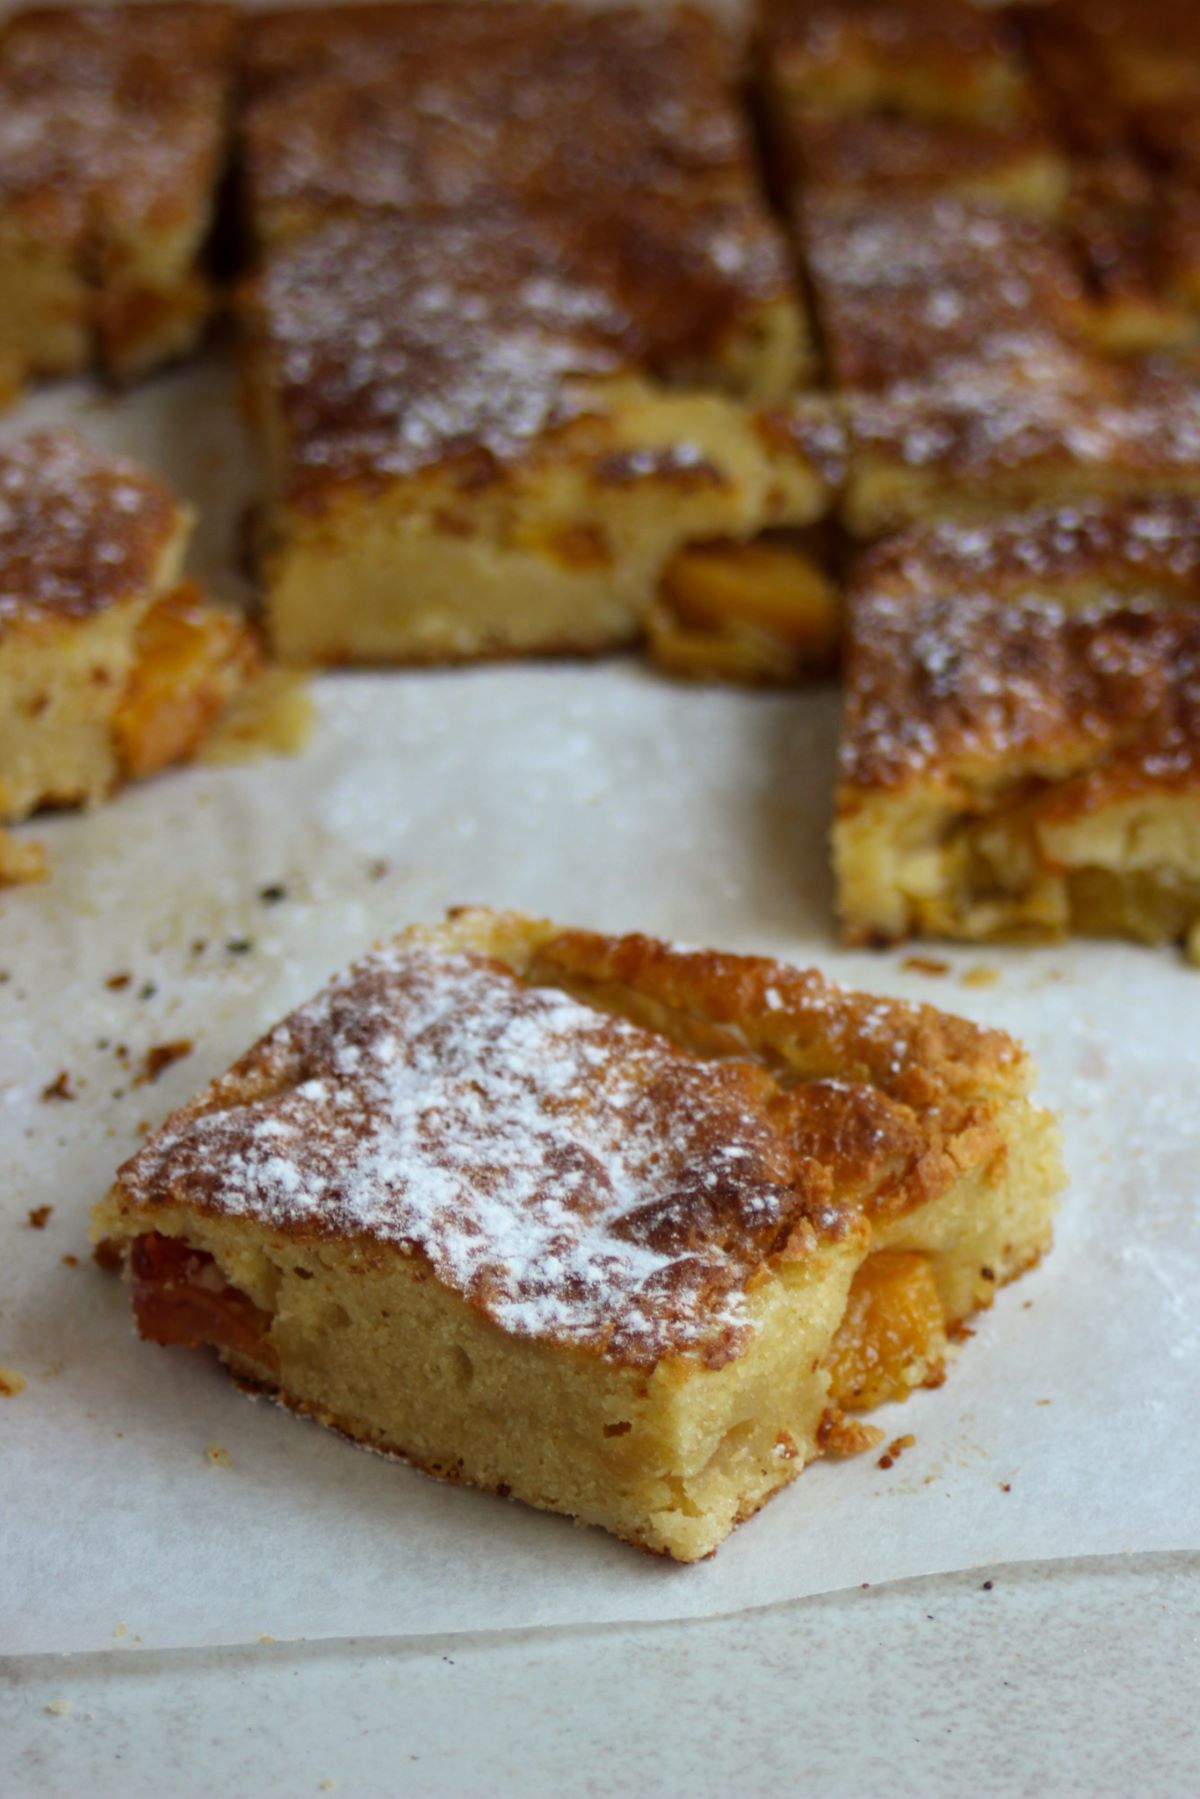 Portions of peach cake on parchment paper.